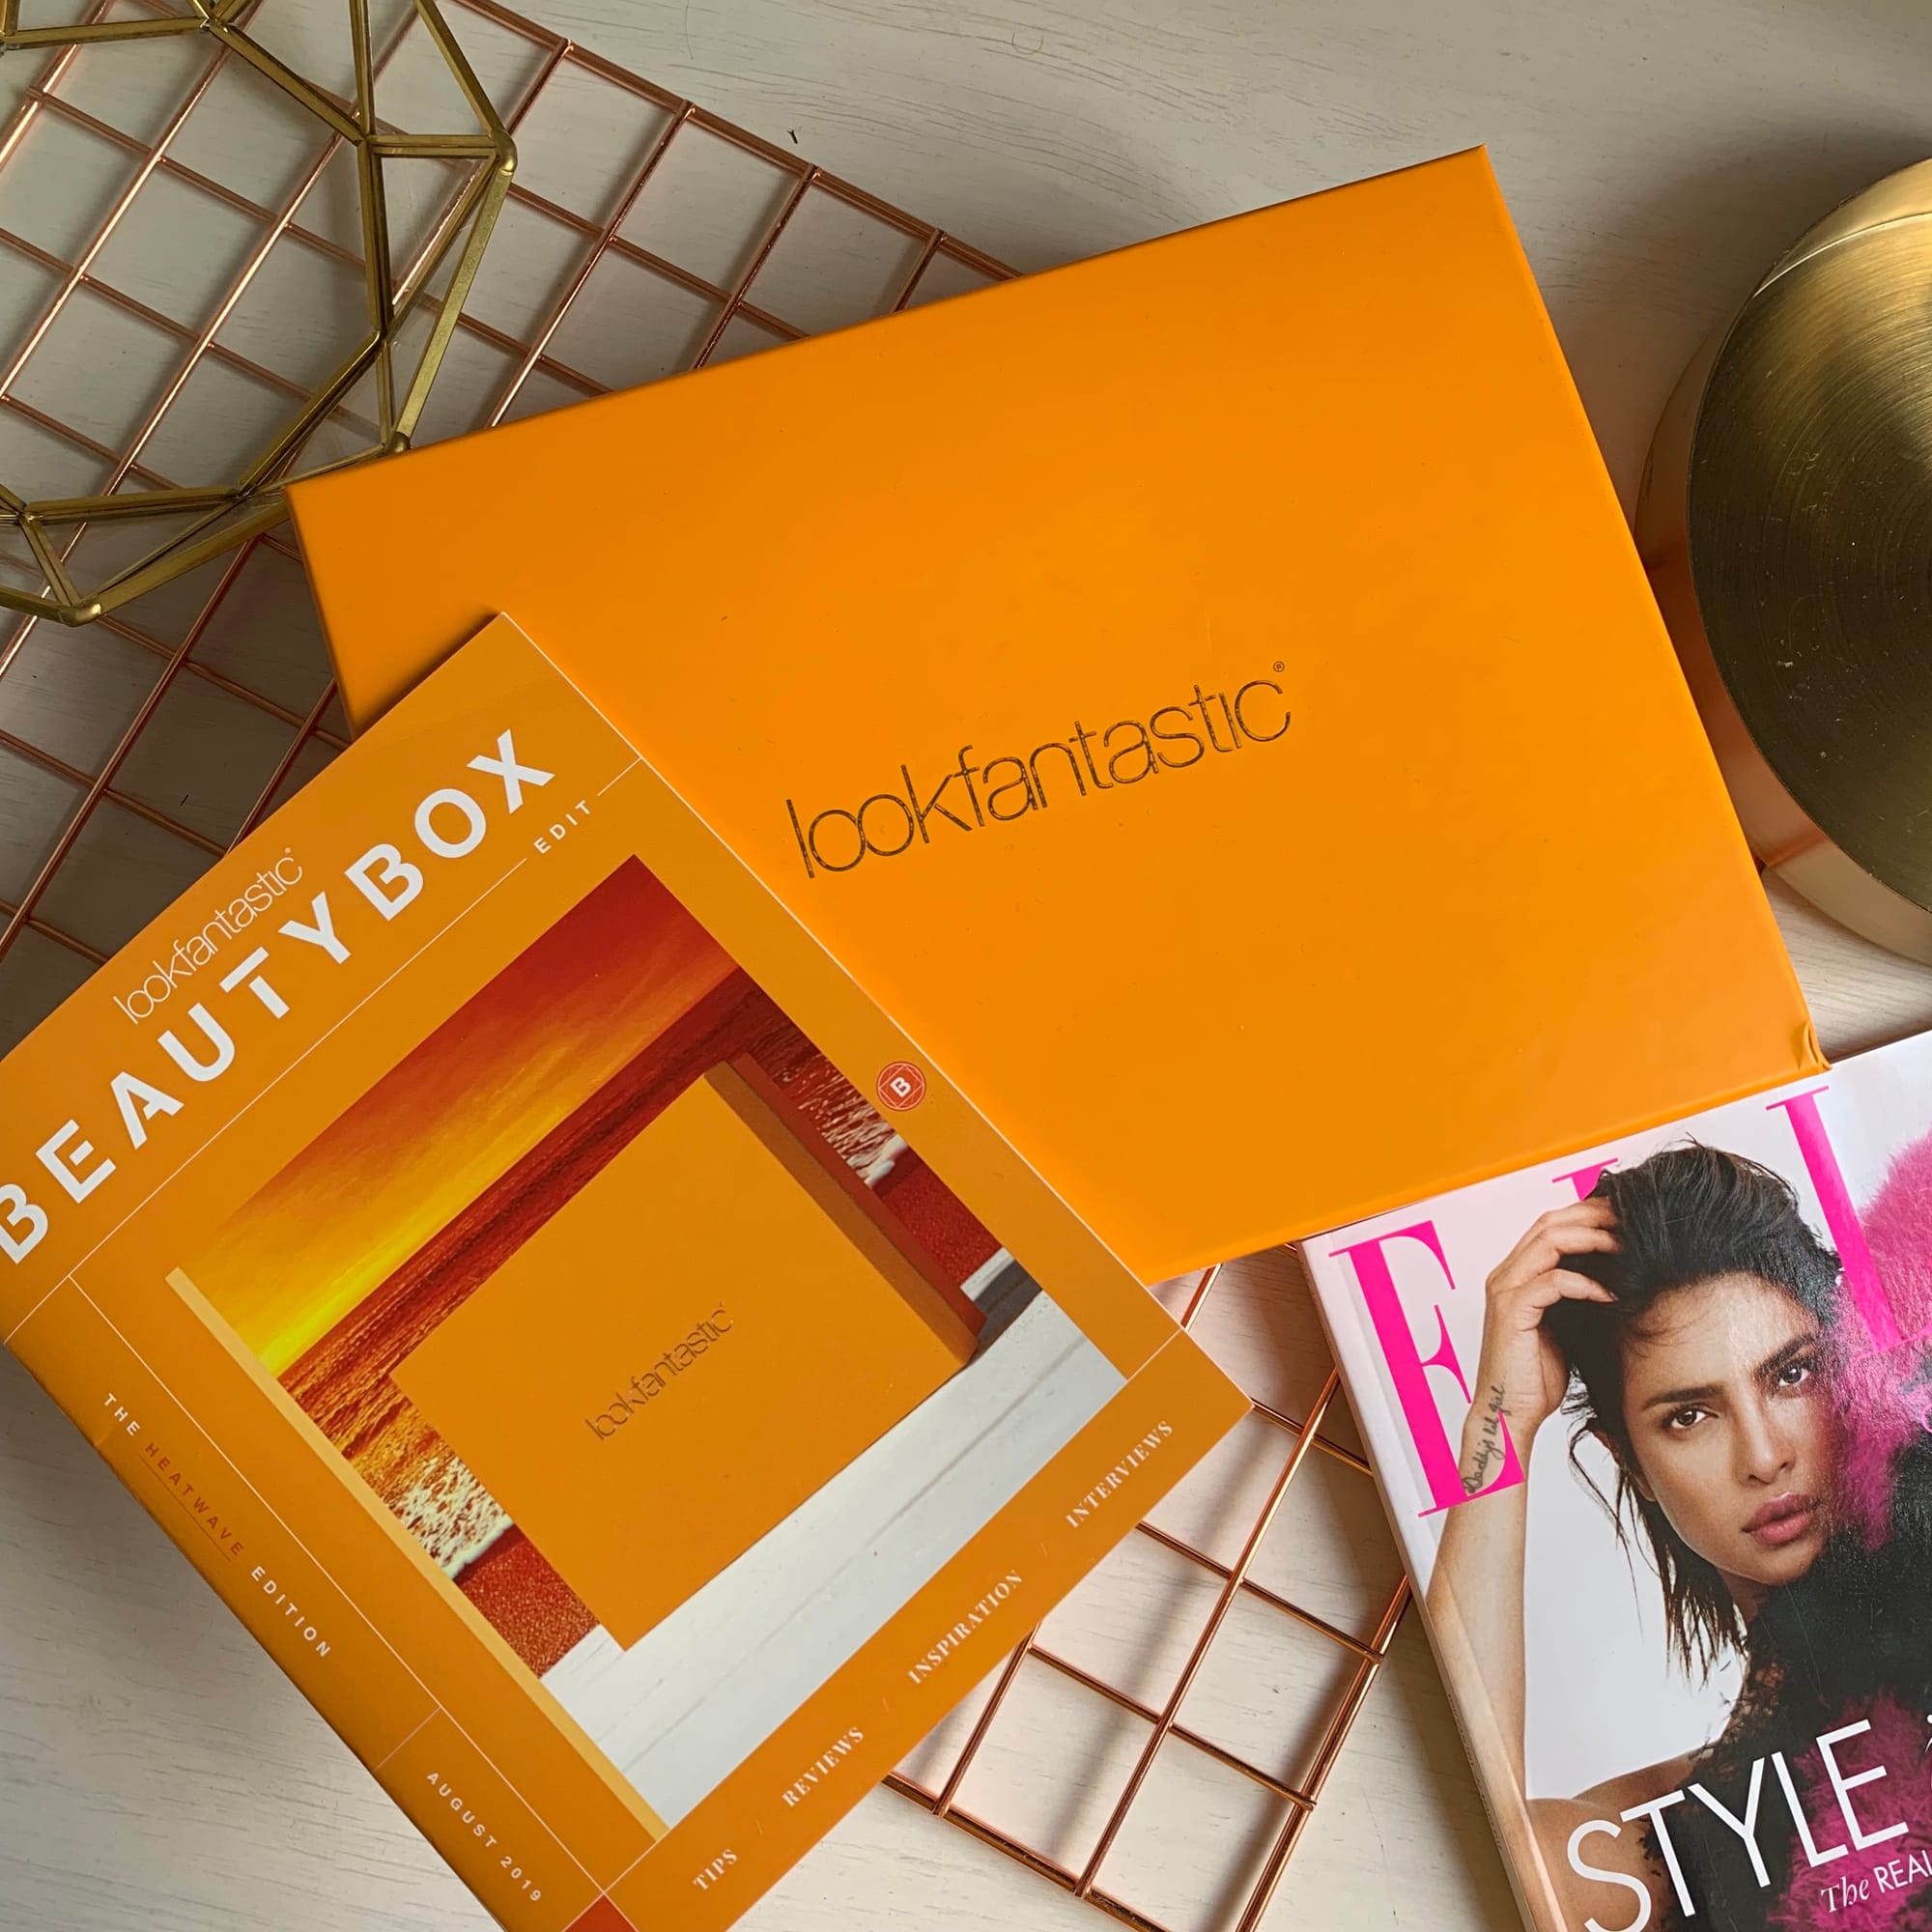 Look Fantastic Beauty Box Review - August 2019 - Miss Boux